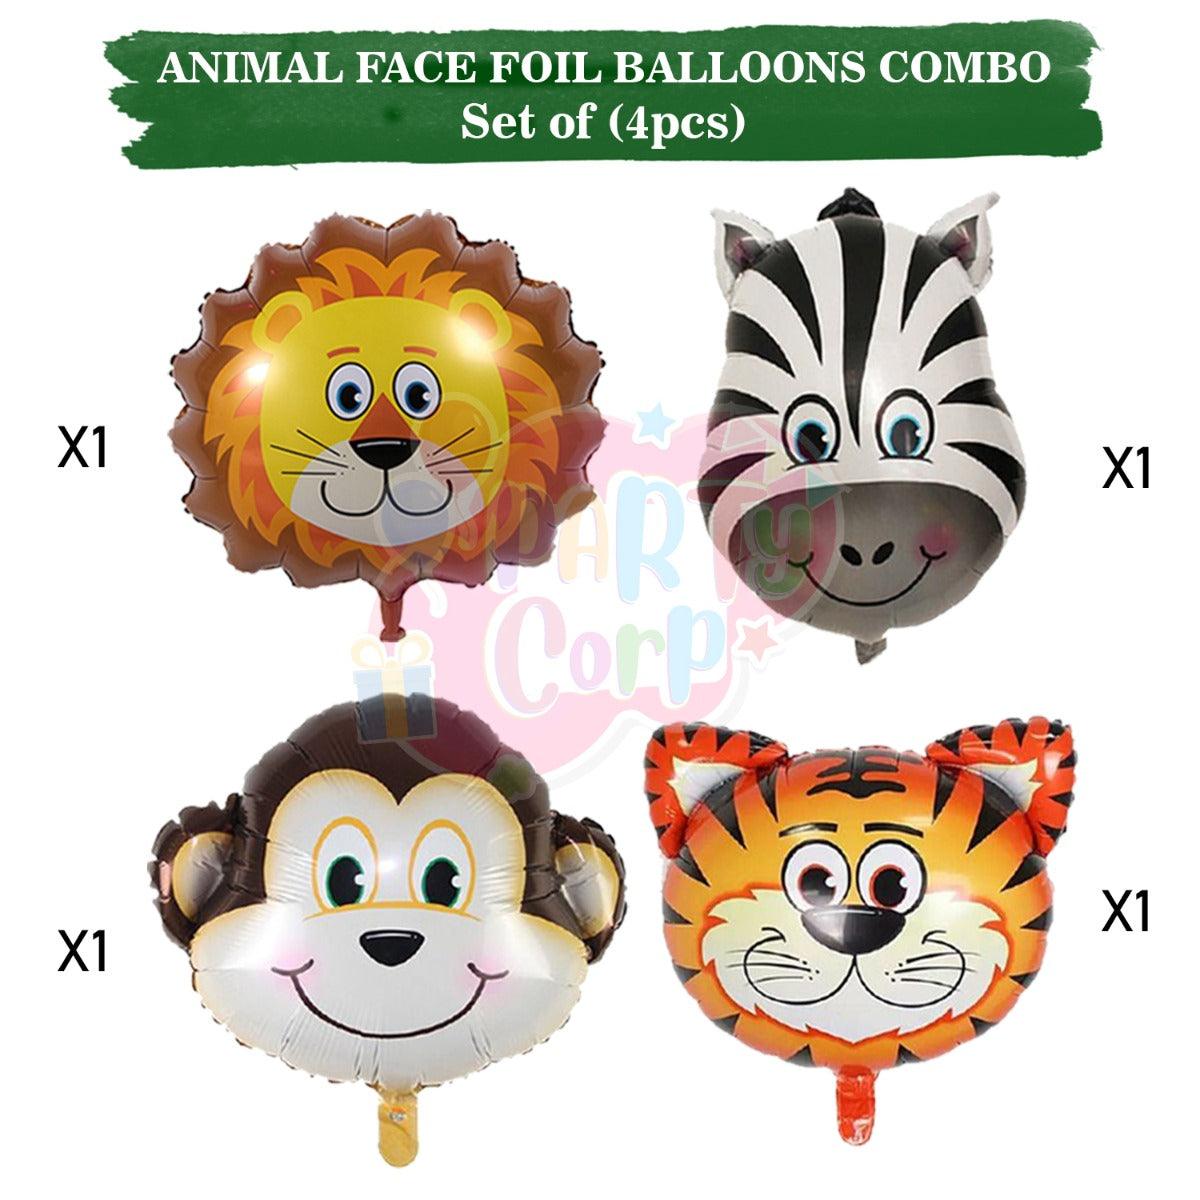 PartyCorp Animal Head Shaped Foil Balloons, Jungle Theme Decoration (Tiger, Lion, Monkey, Zebra) - Pack Of 4